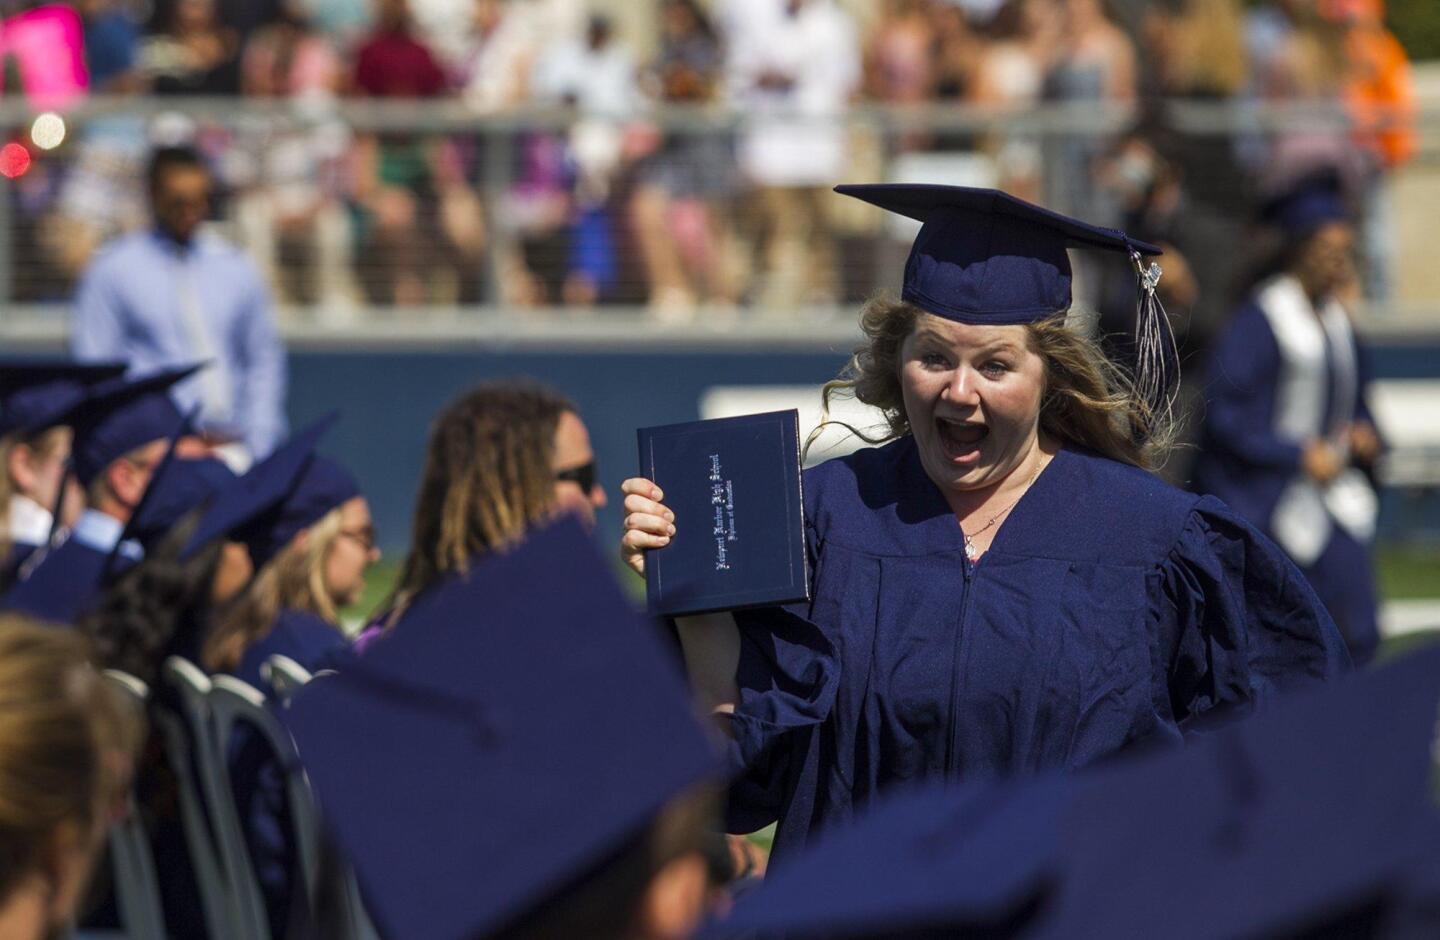 Kaylee Call shows off her diploma during the 2016 commencement ceremony for Newport Harbor High School at Orange Coast College on Thursday.